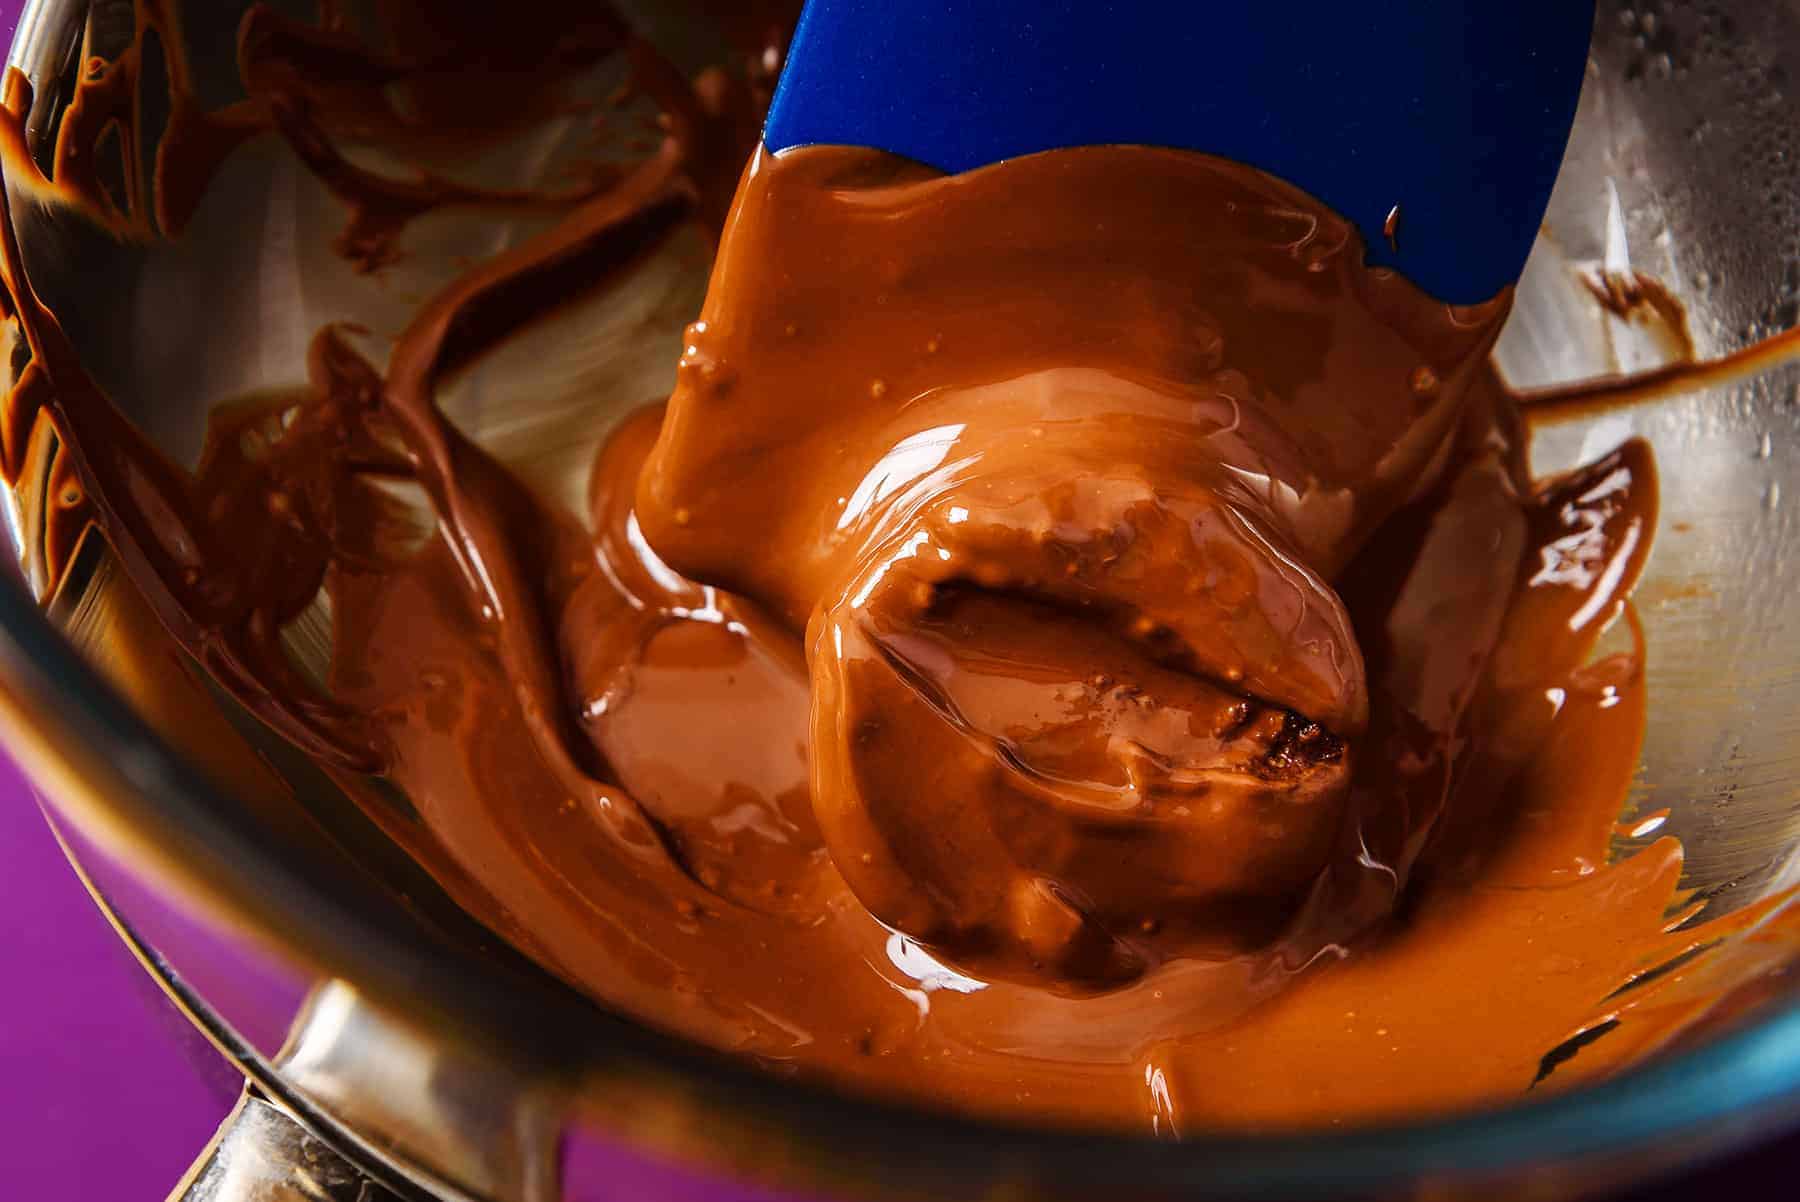 Turning in melted chocolate